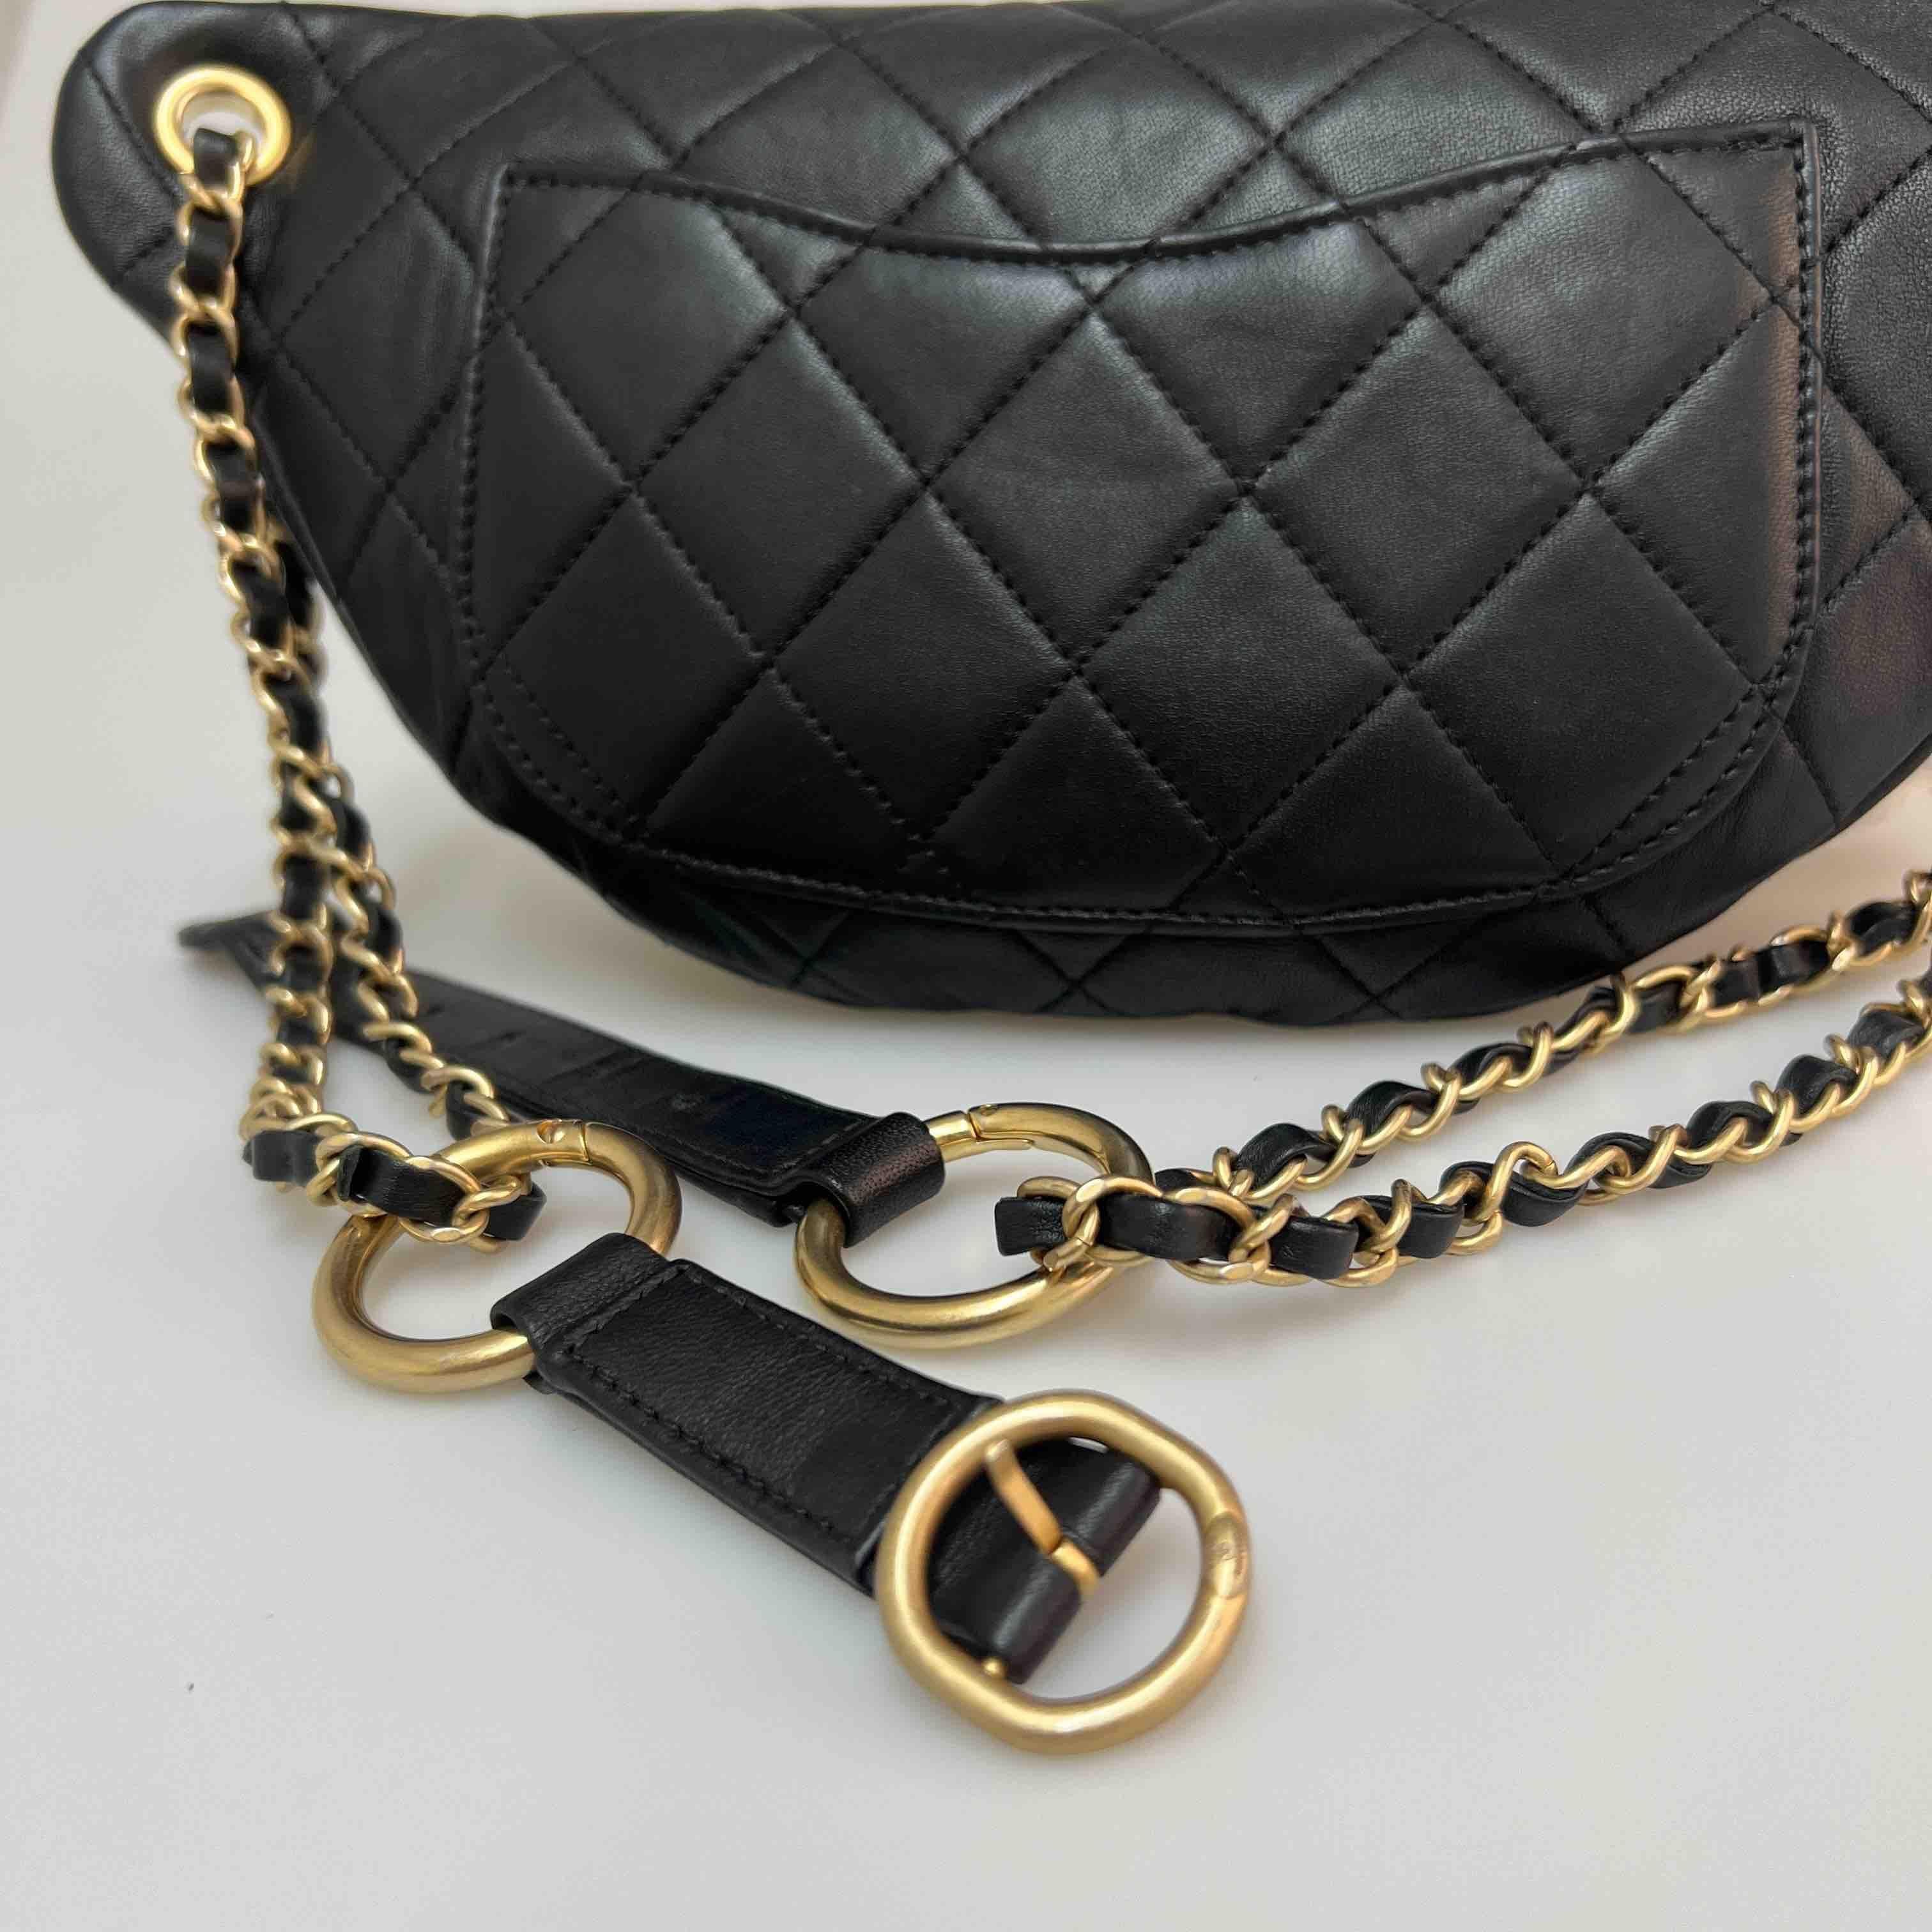 Women's or Men's CHANEL Banana Belt Bag in Black Quilted Leather